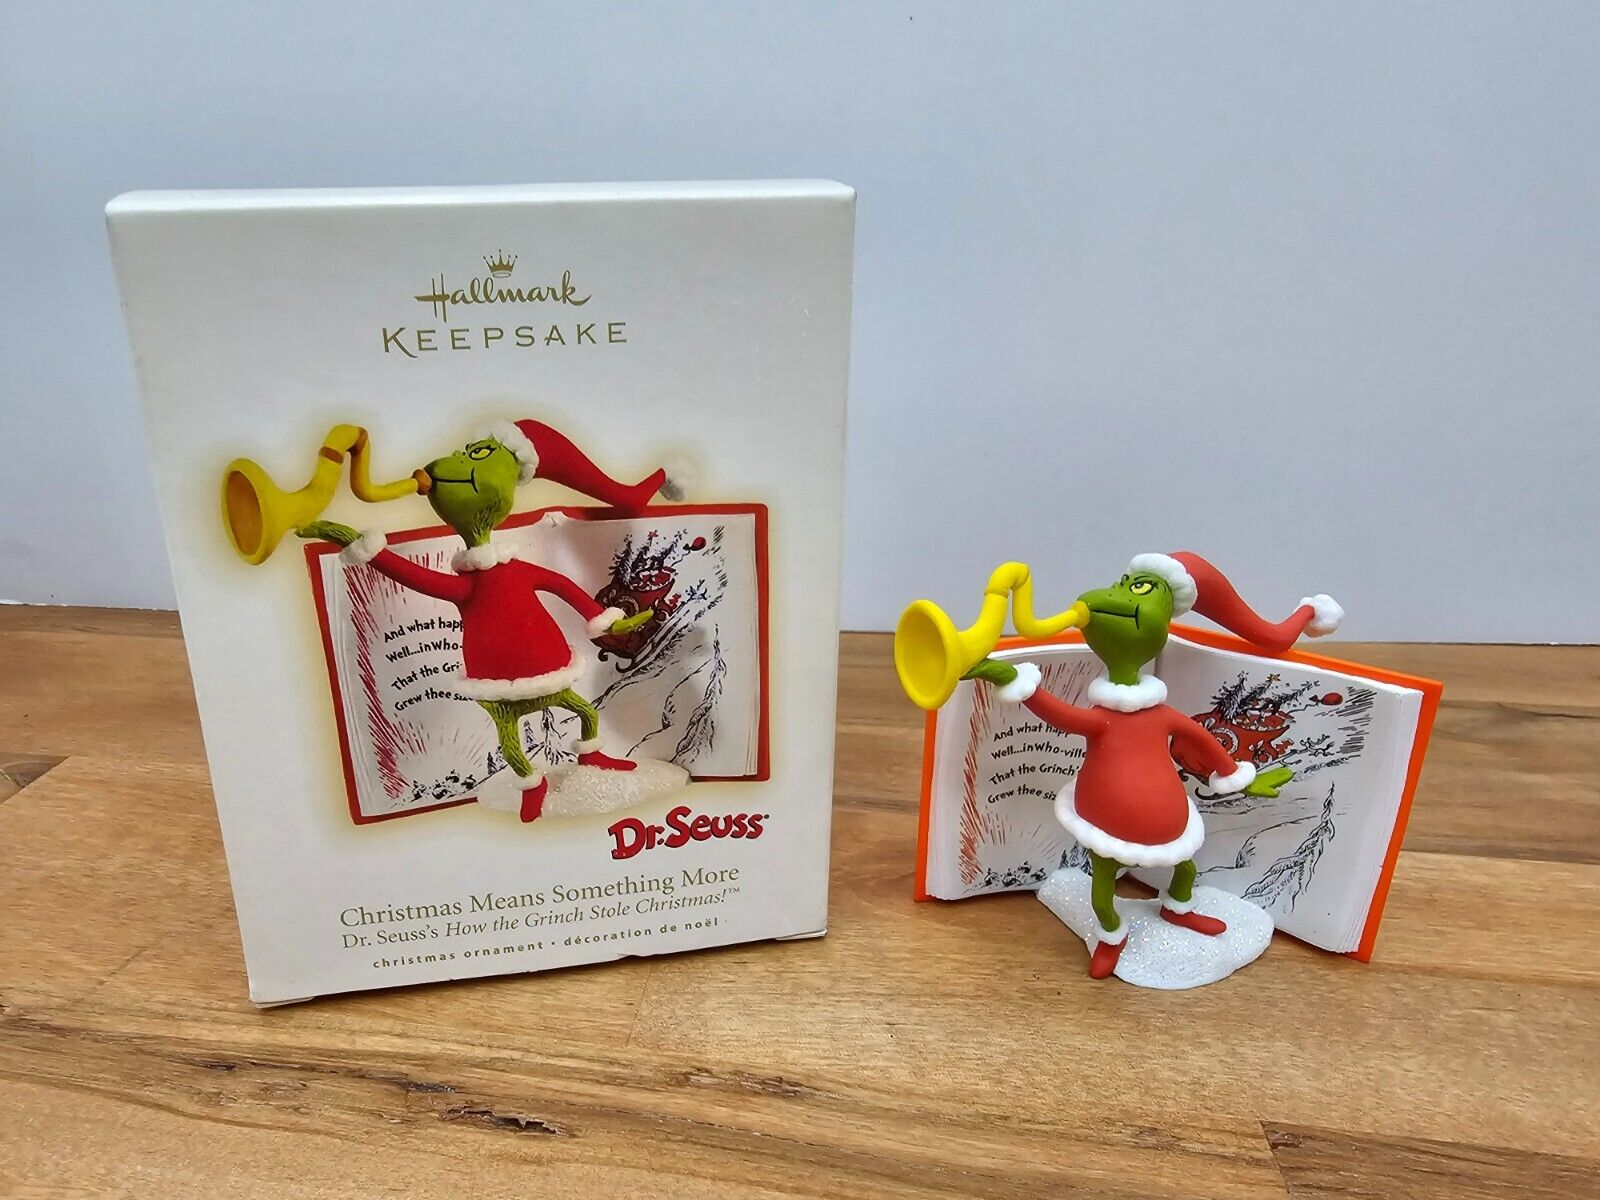 New 2009 Hallmark Dr Seuss Grinch Stole Christmas Means Something More Ornament